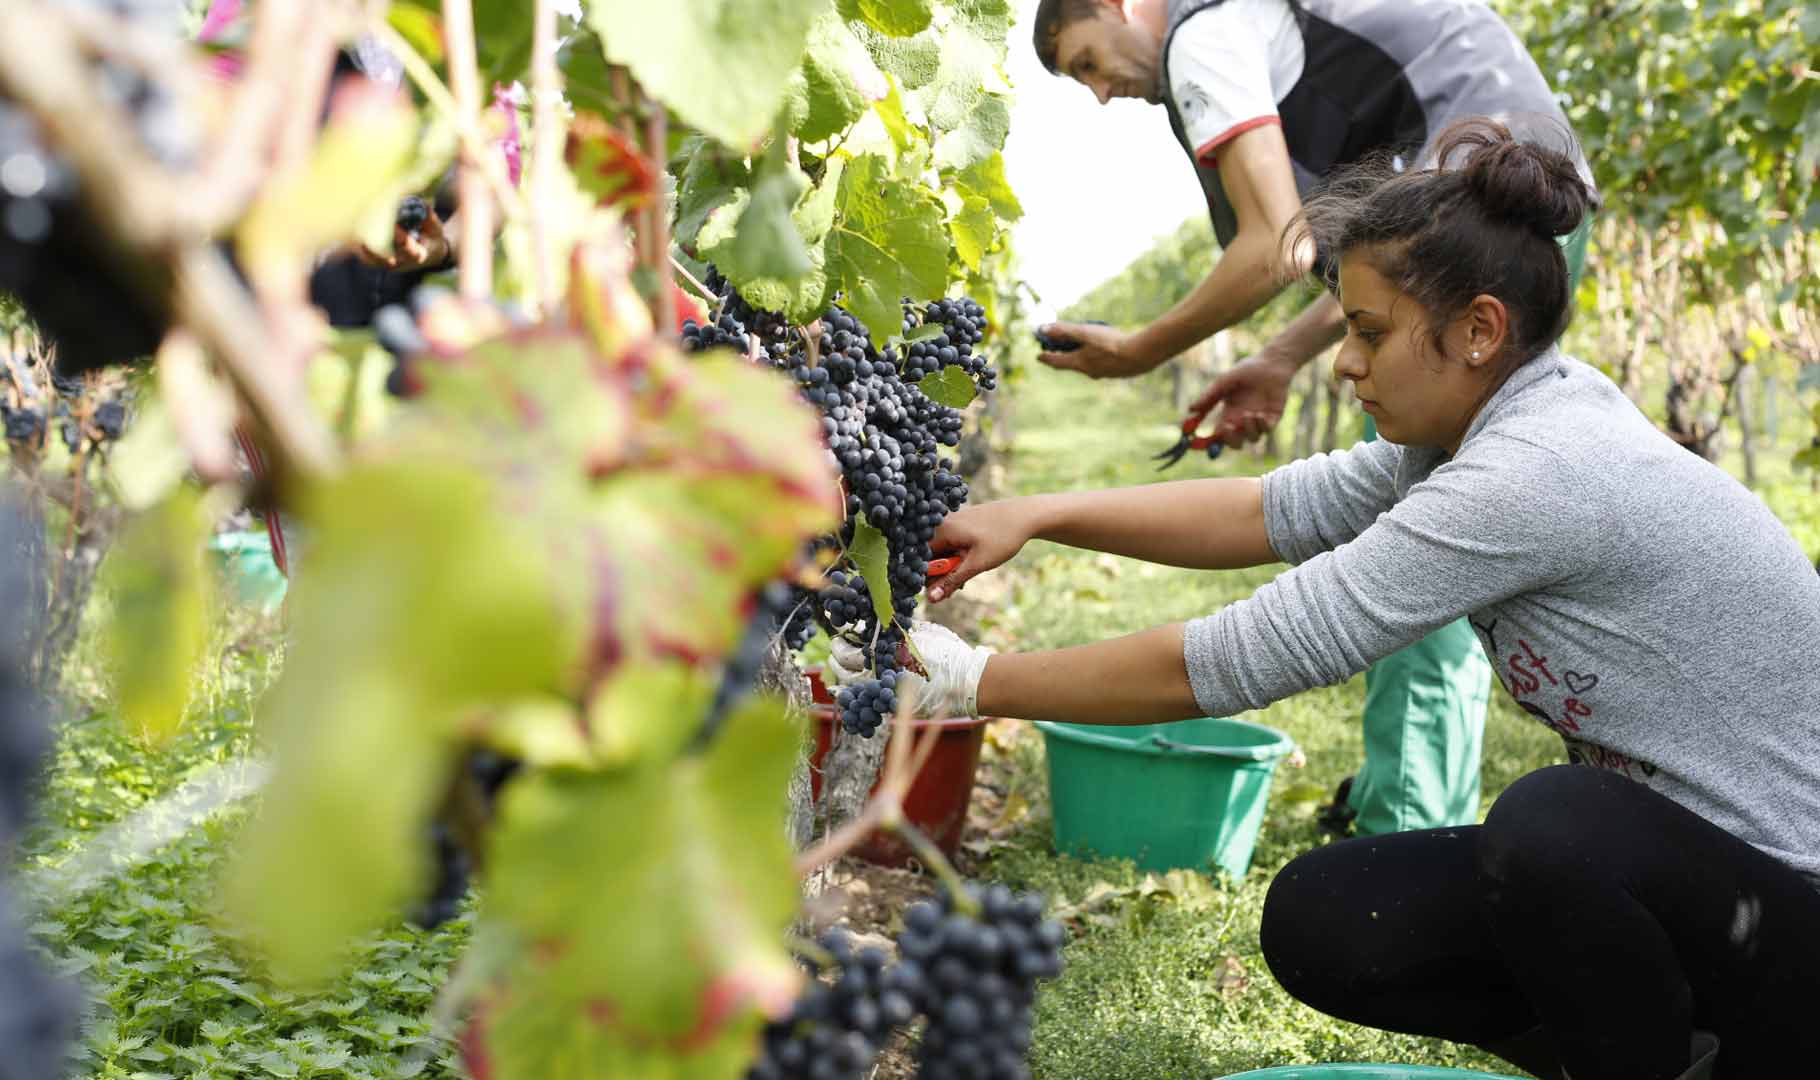 Manual harvest of the grapes